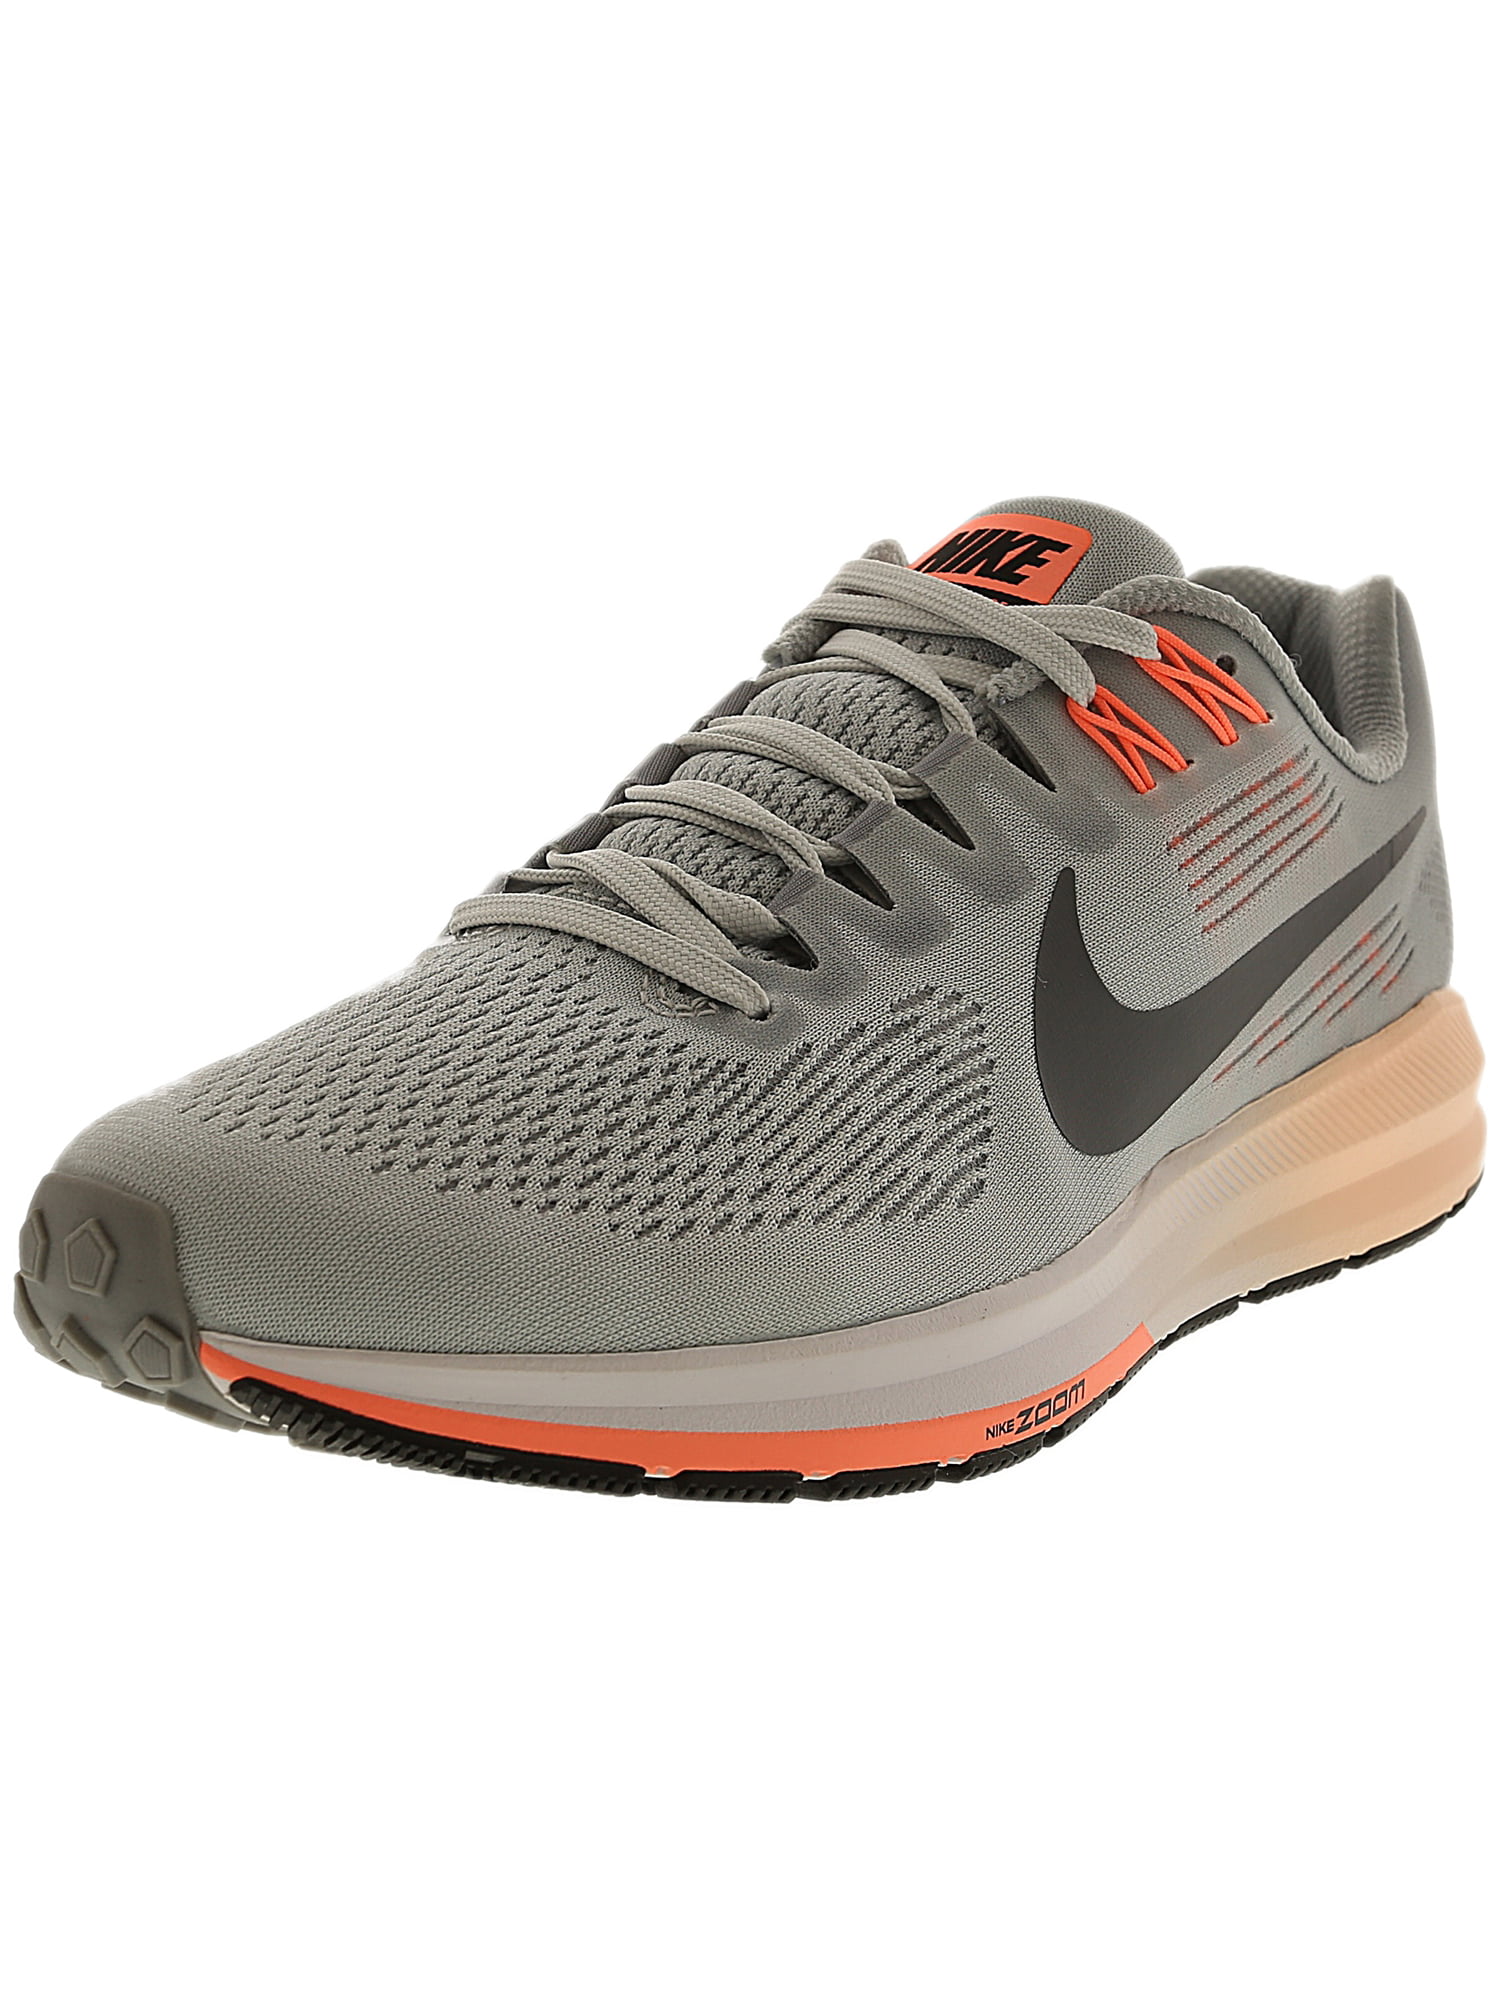 nike wolf grey running shoes